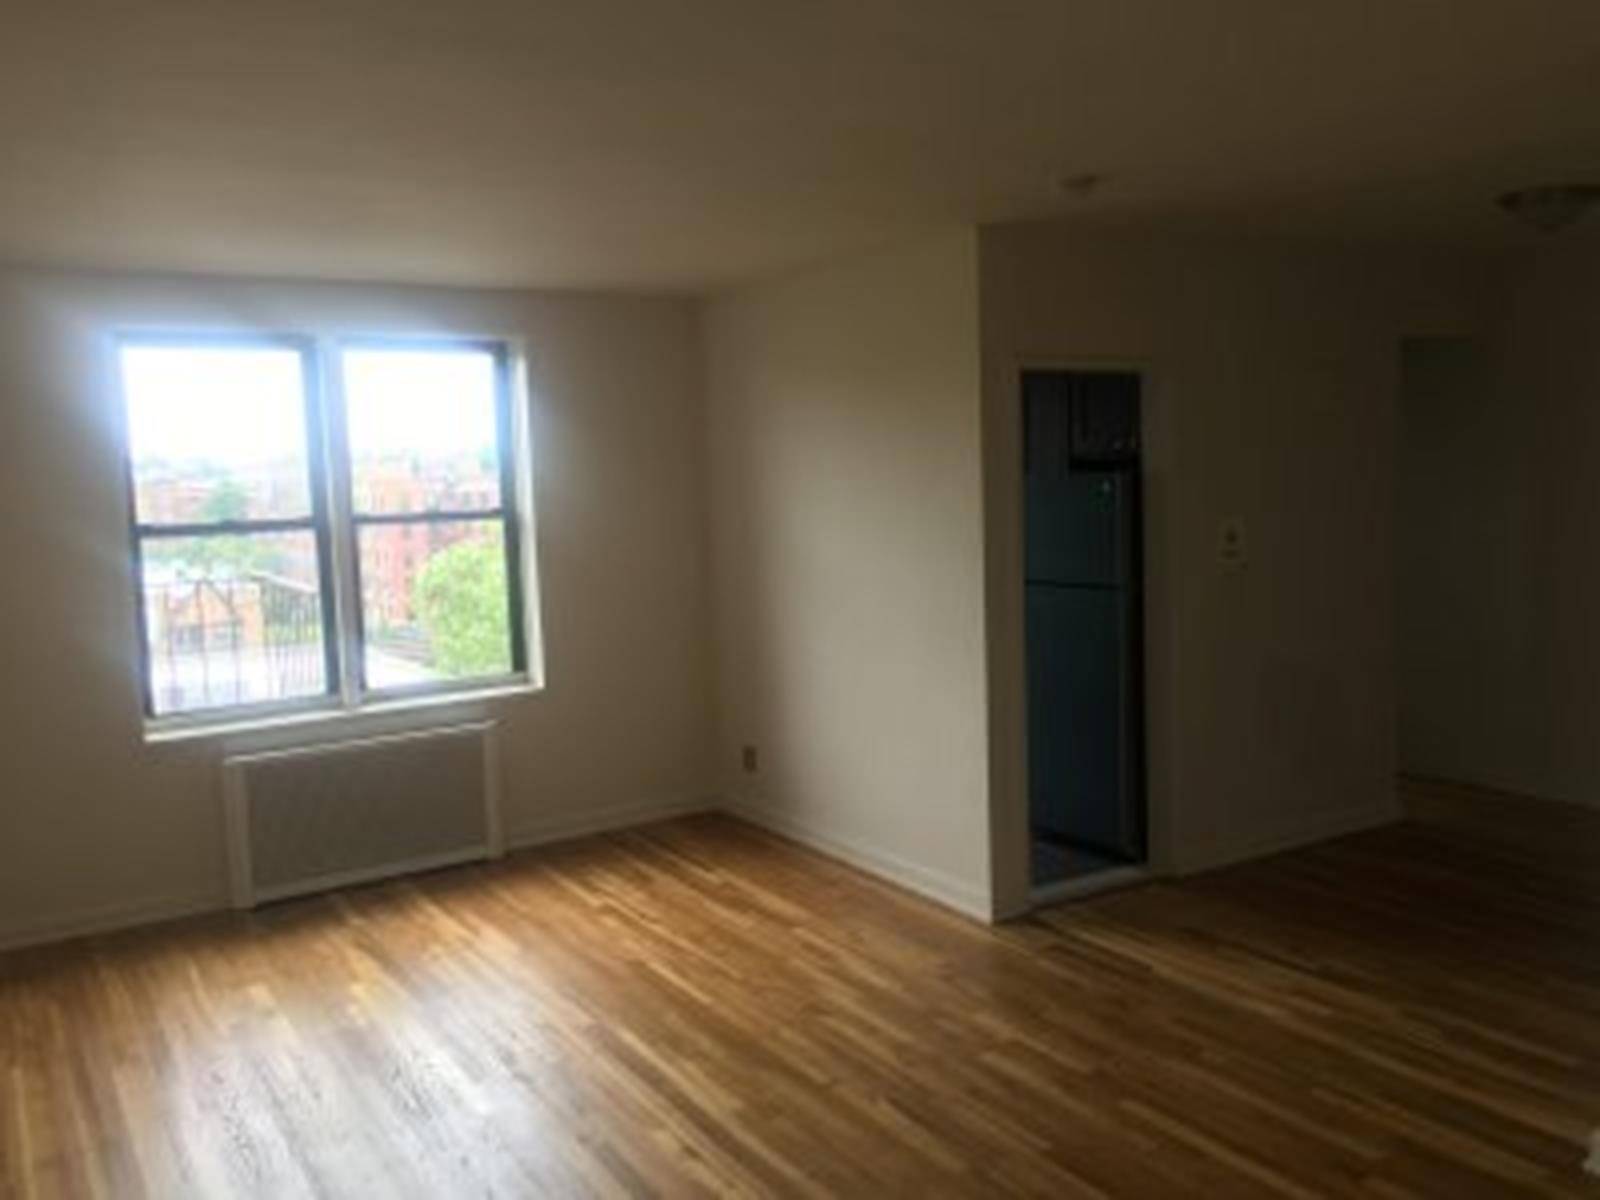 THE PICTURES ARE OF THE SAME LINE APARTMENT THAT HAS BEEN JUST RENTED AND THIS IS WHAT A FINISHED APARTMENT LOOKS LIKE.